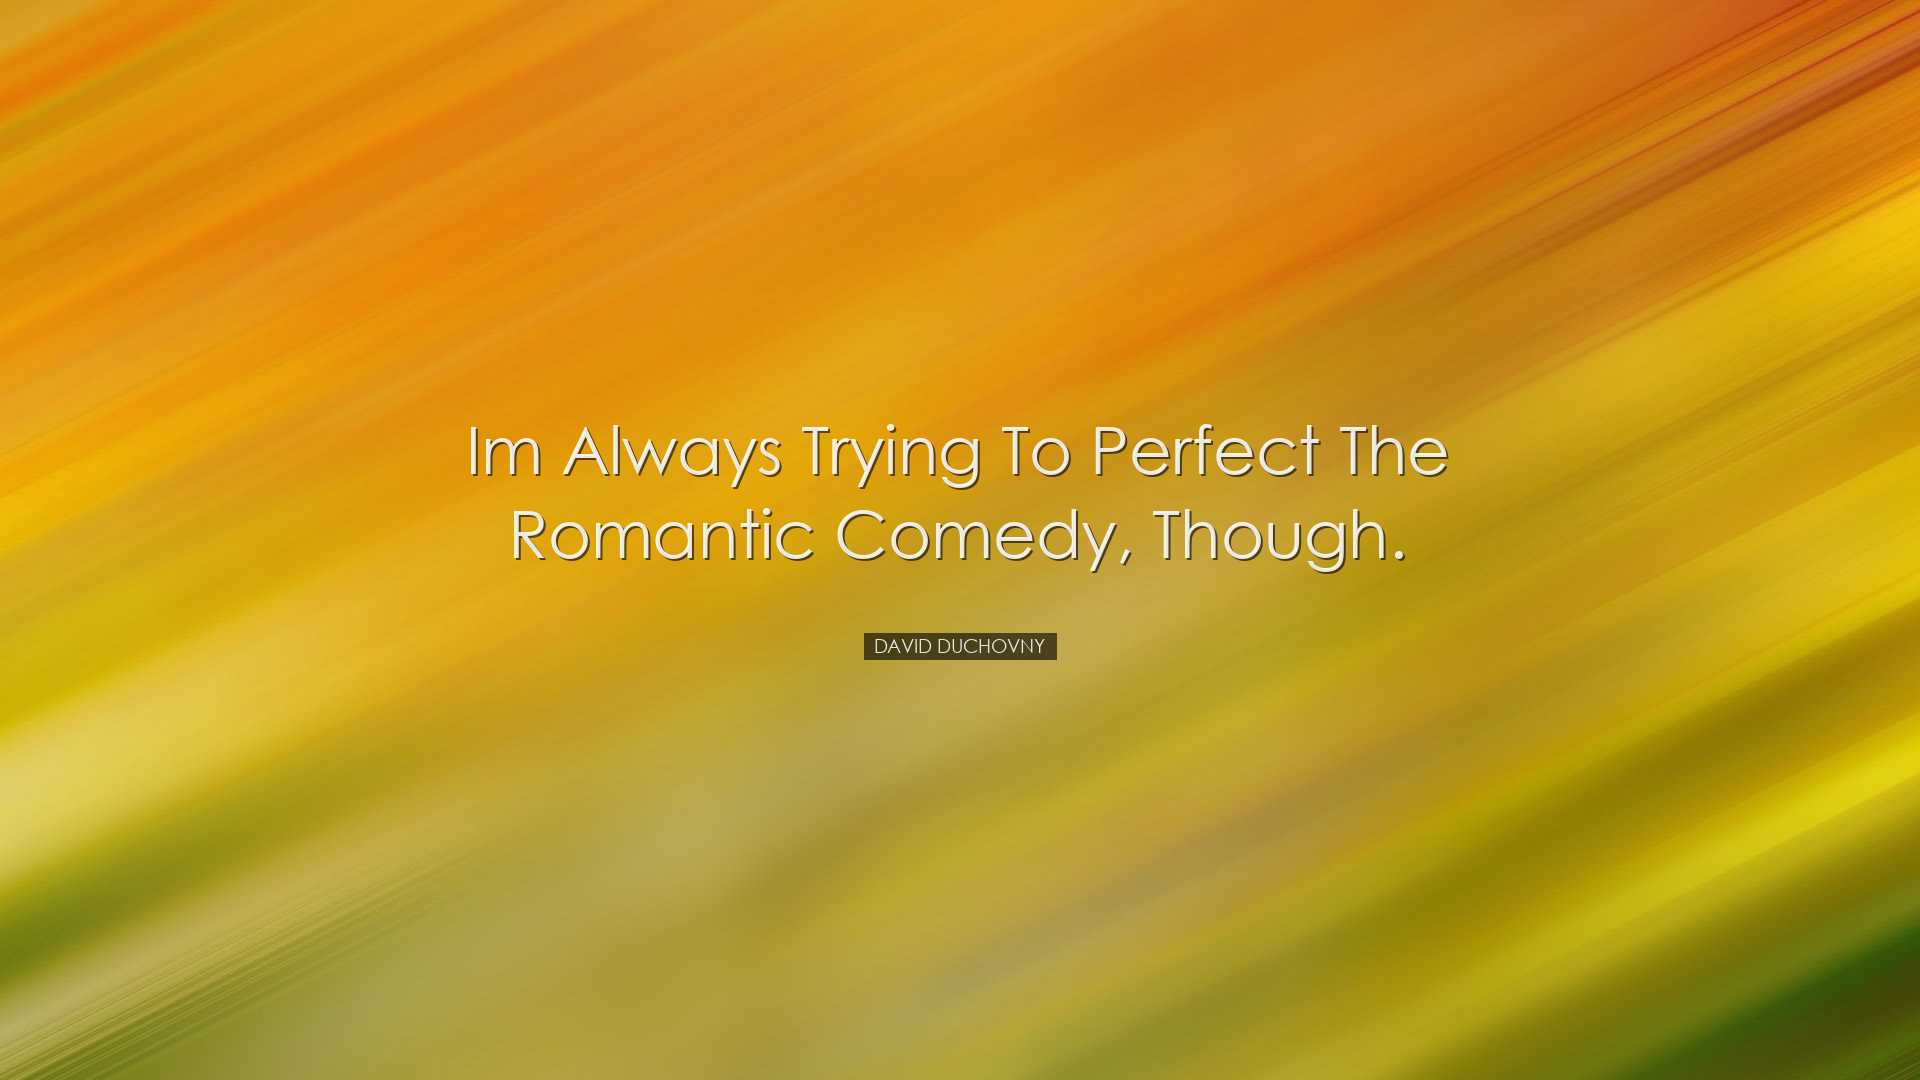 Im always trying to perfect the romantic comedy, though. - David D